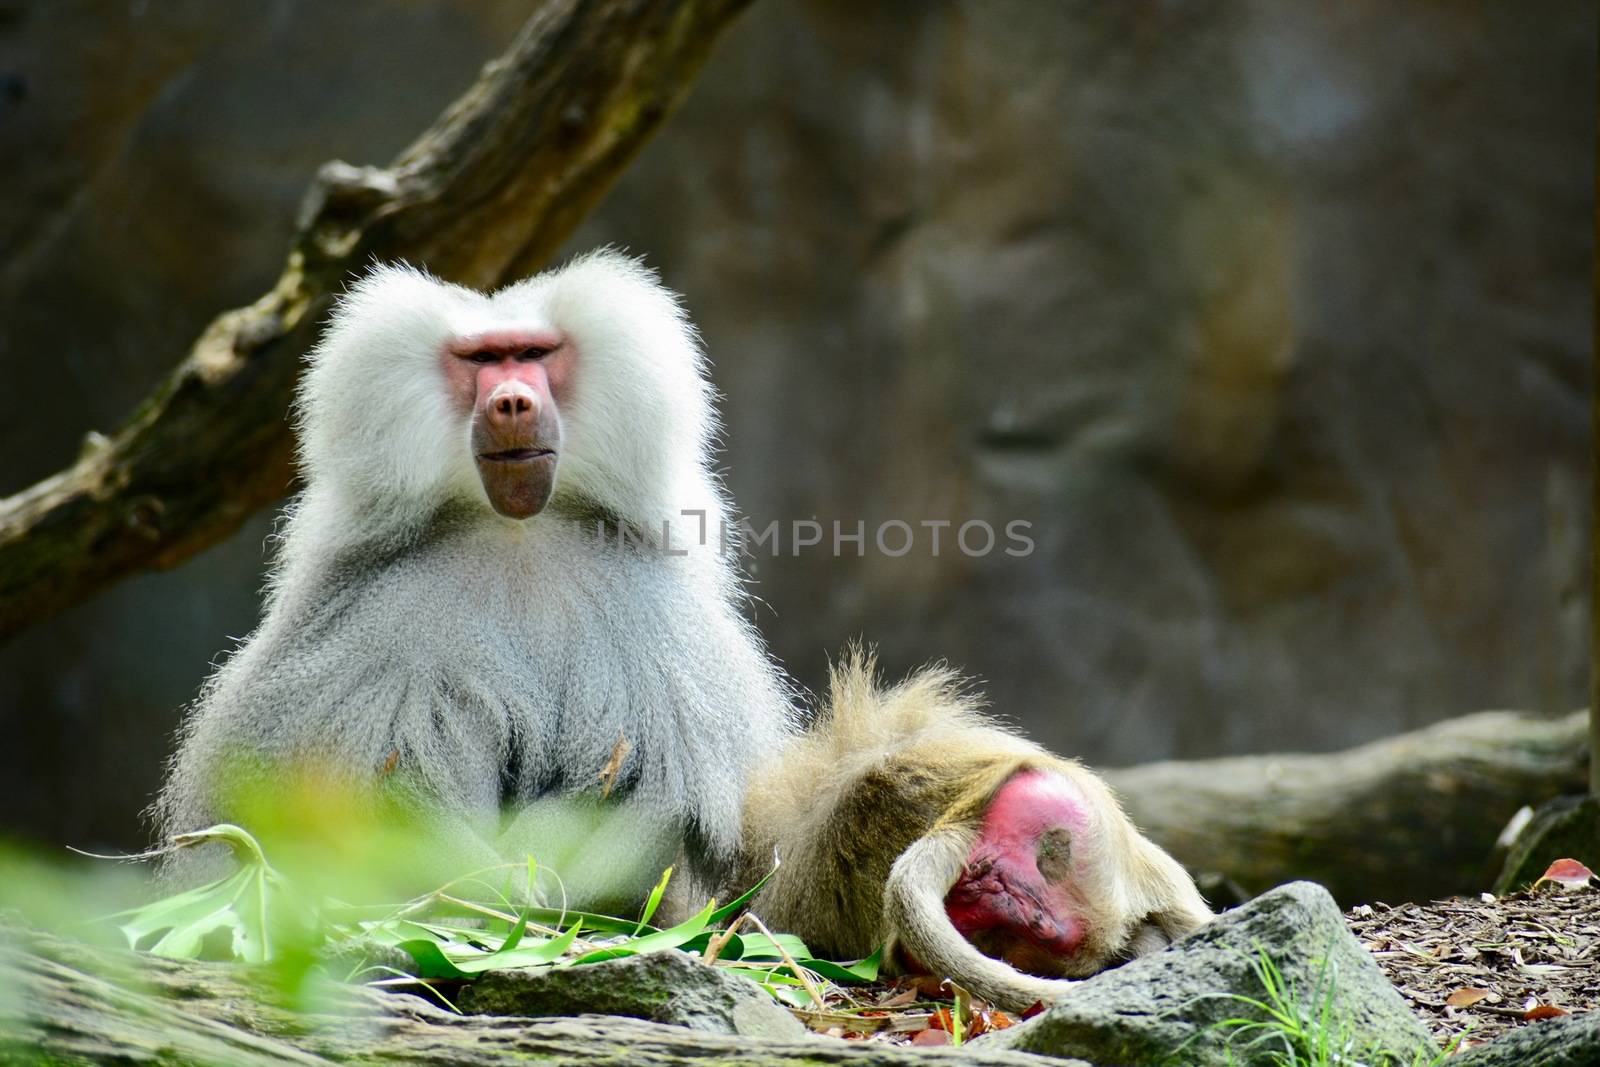 Hamadryas Baboon displays complex social behaviors, and can live in troops of several hundred individuals.